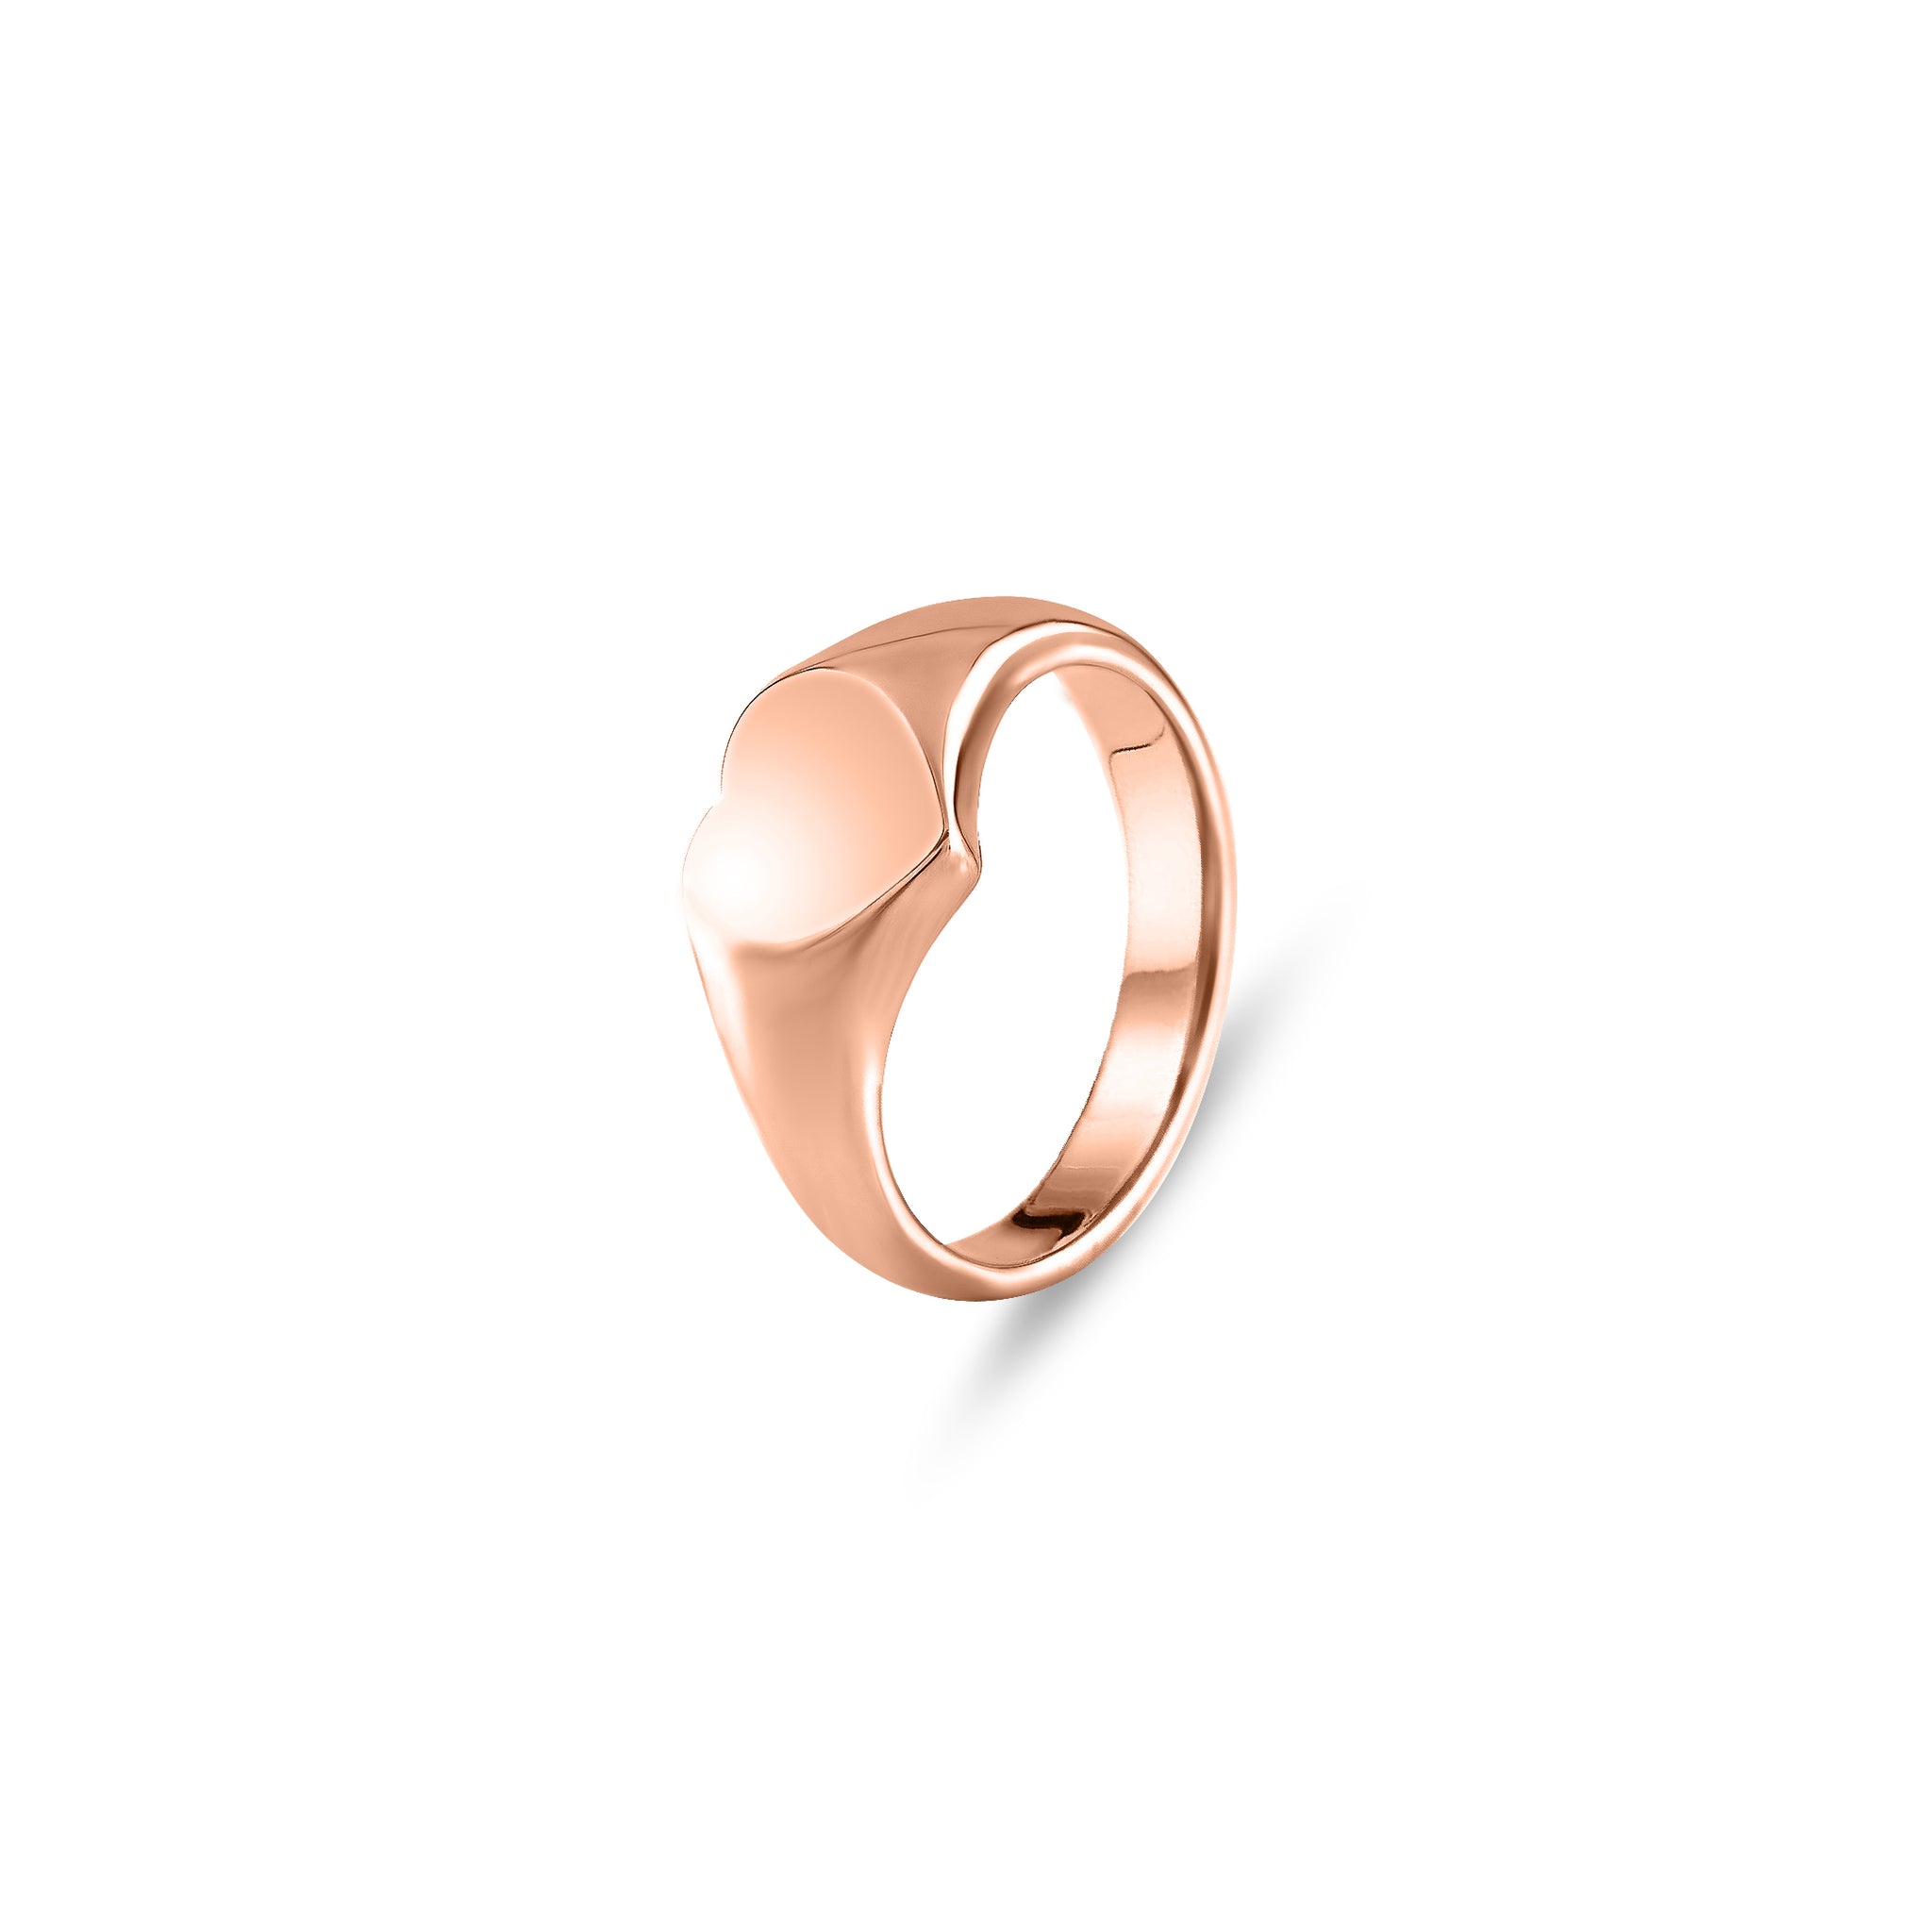 18ct Rose Gold 9 x 9mm Heart Signet Ring